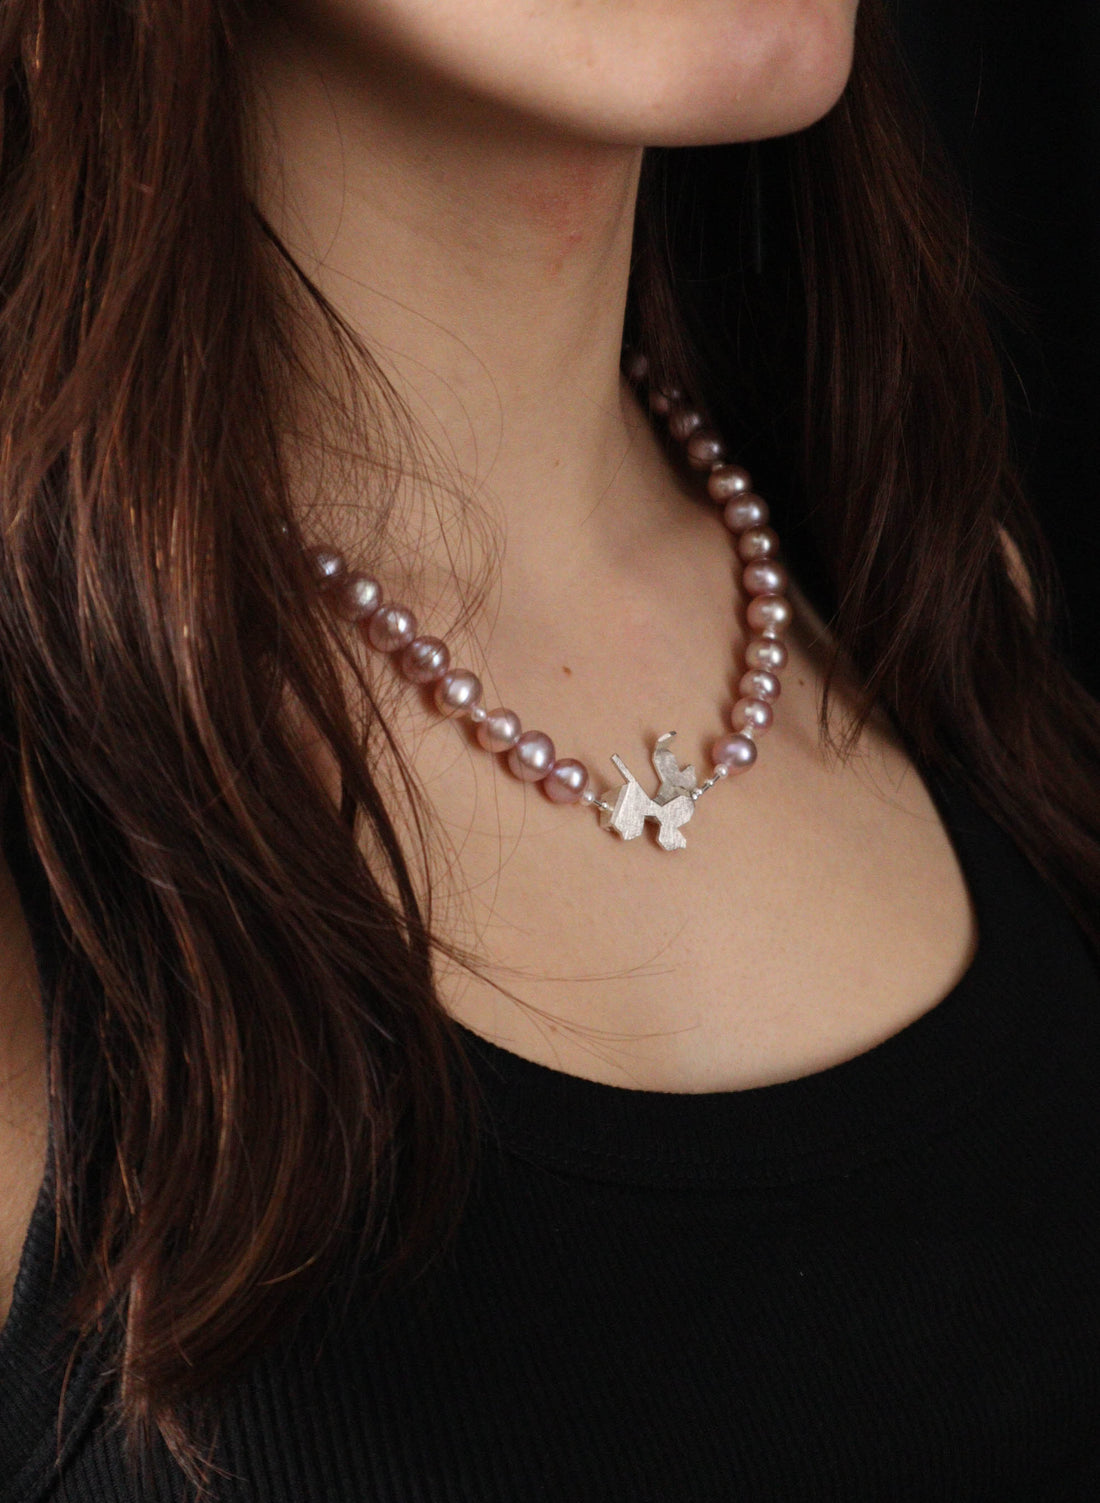 Dual Leaf Structure Necklace with Pearls